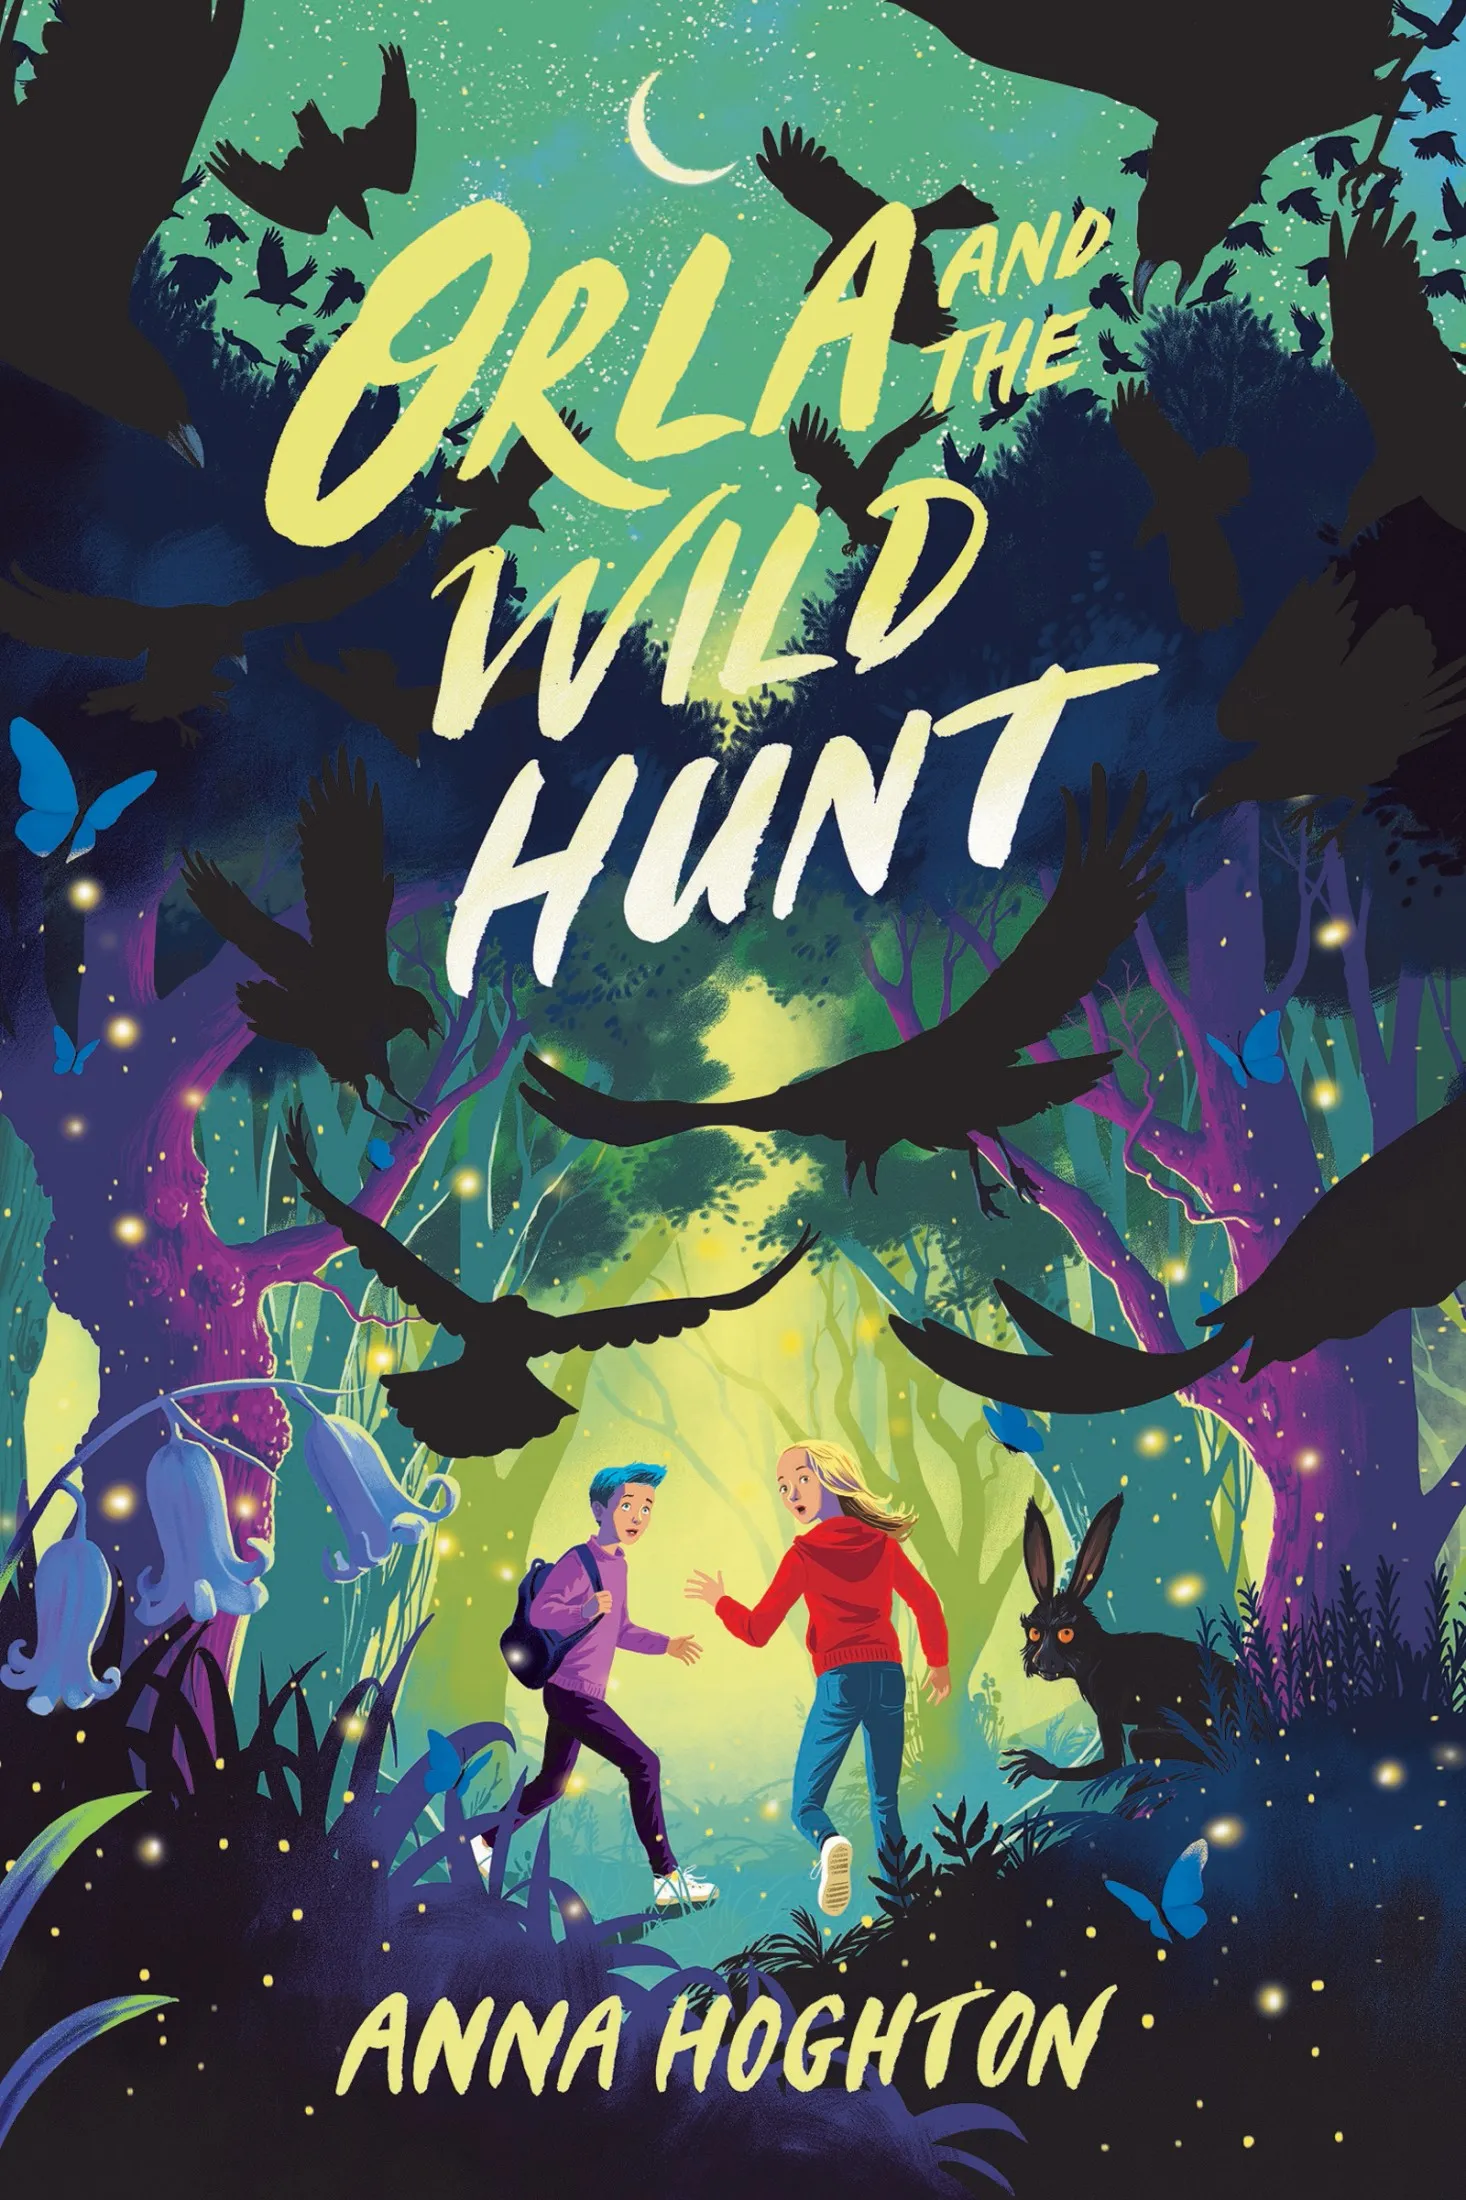 Orla and the Wild Hunt